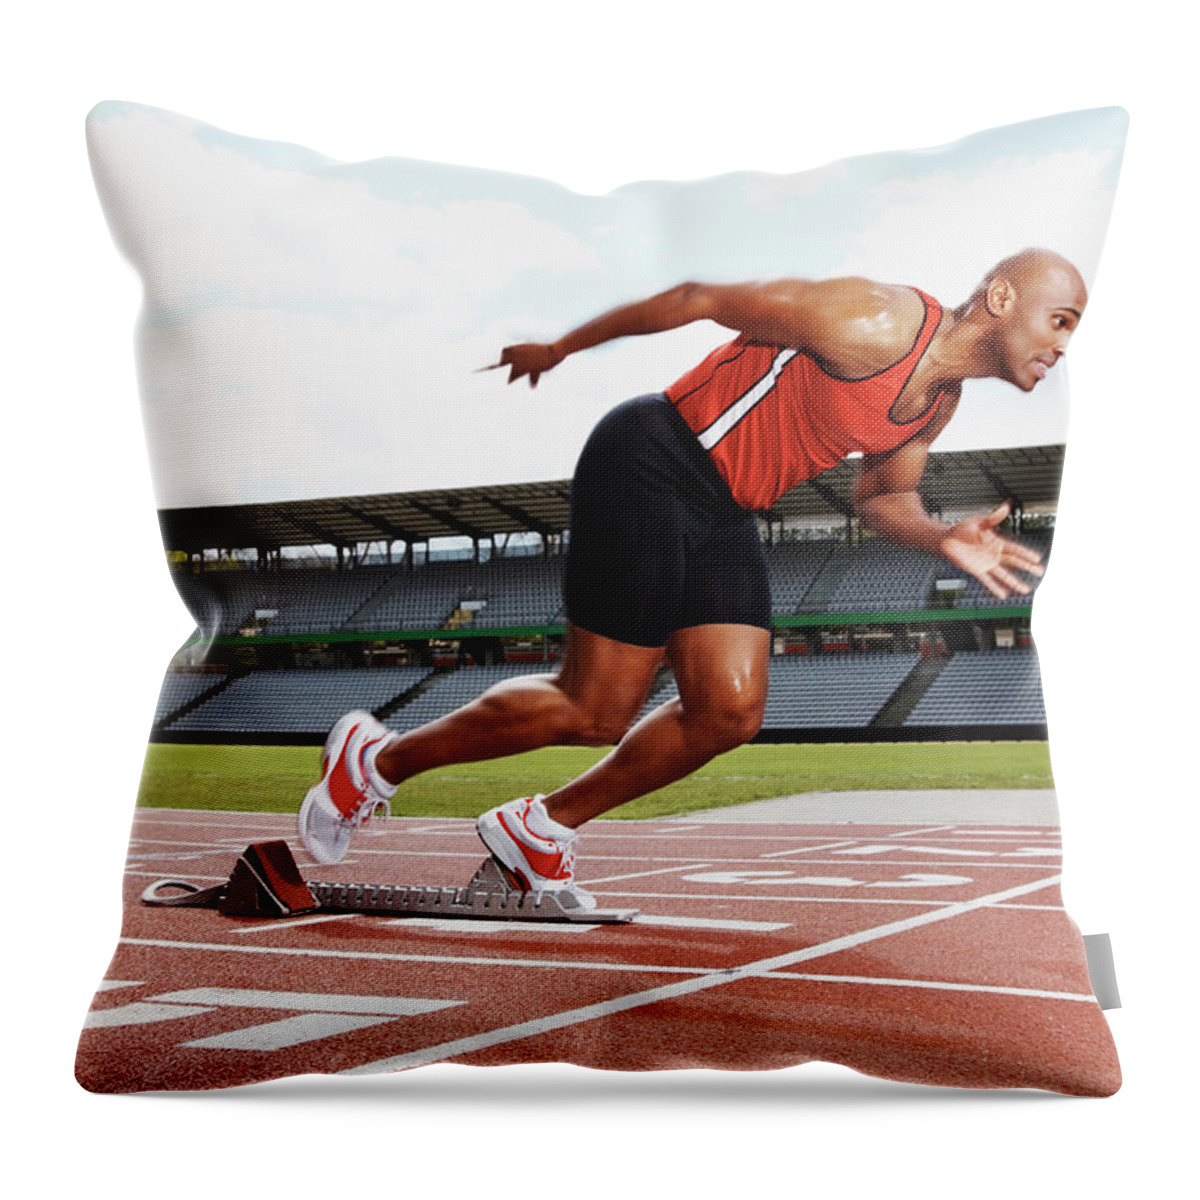 Expertise Throw Pillow featuring the photograph Male Athlete On The Starting Line Of by Globalstock